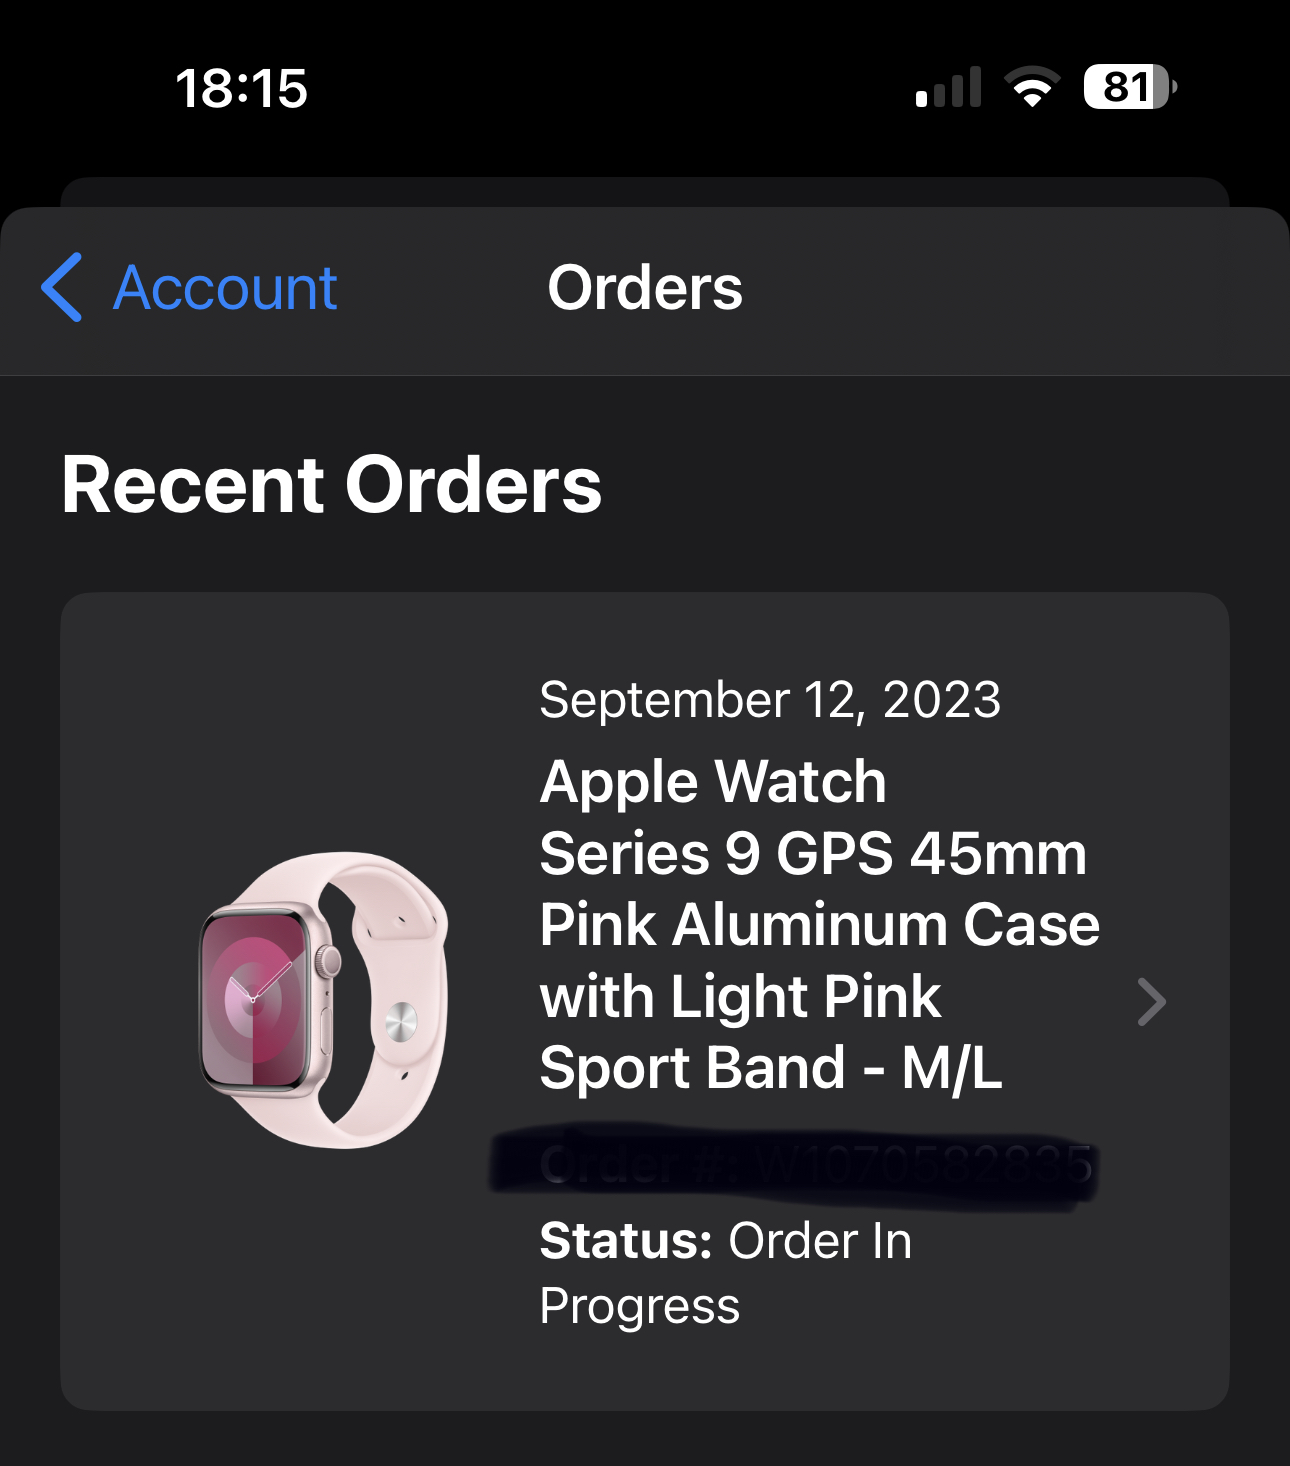 Apple Watch Series 9 GPS 41mm Aluminum Case with Sport Band By FedEx